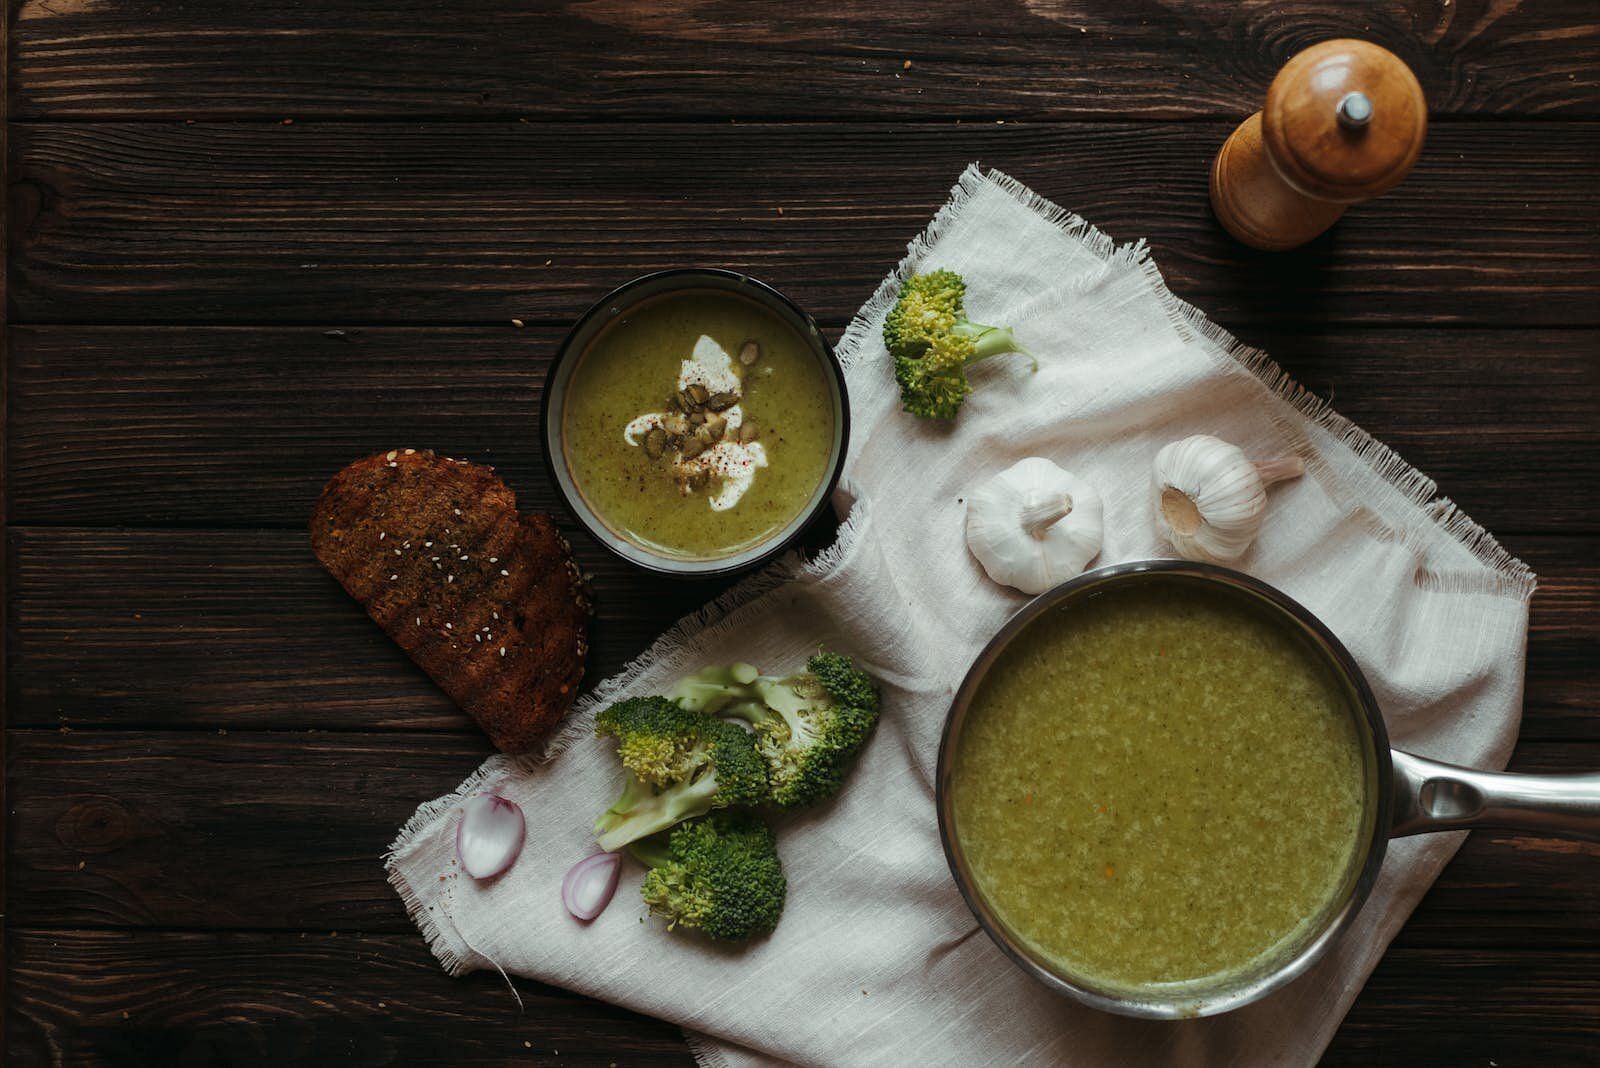 Fresh and healthy broccoli broth (Image source: Pexels)